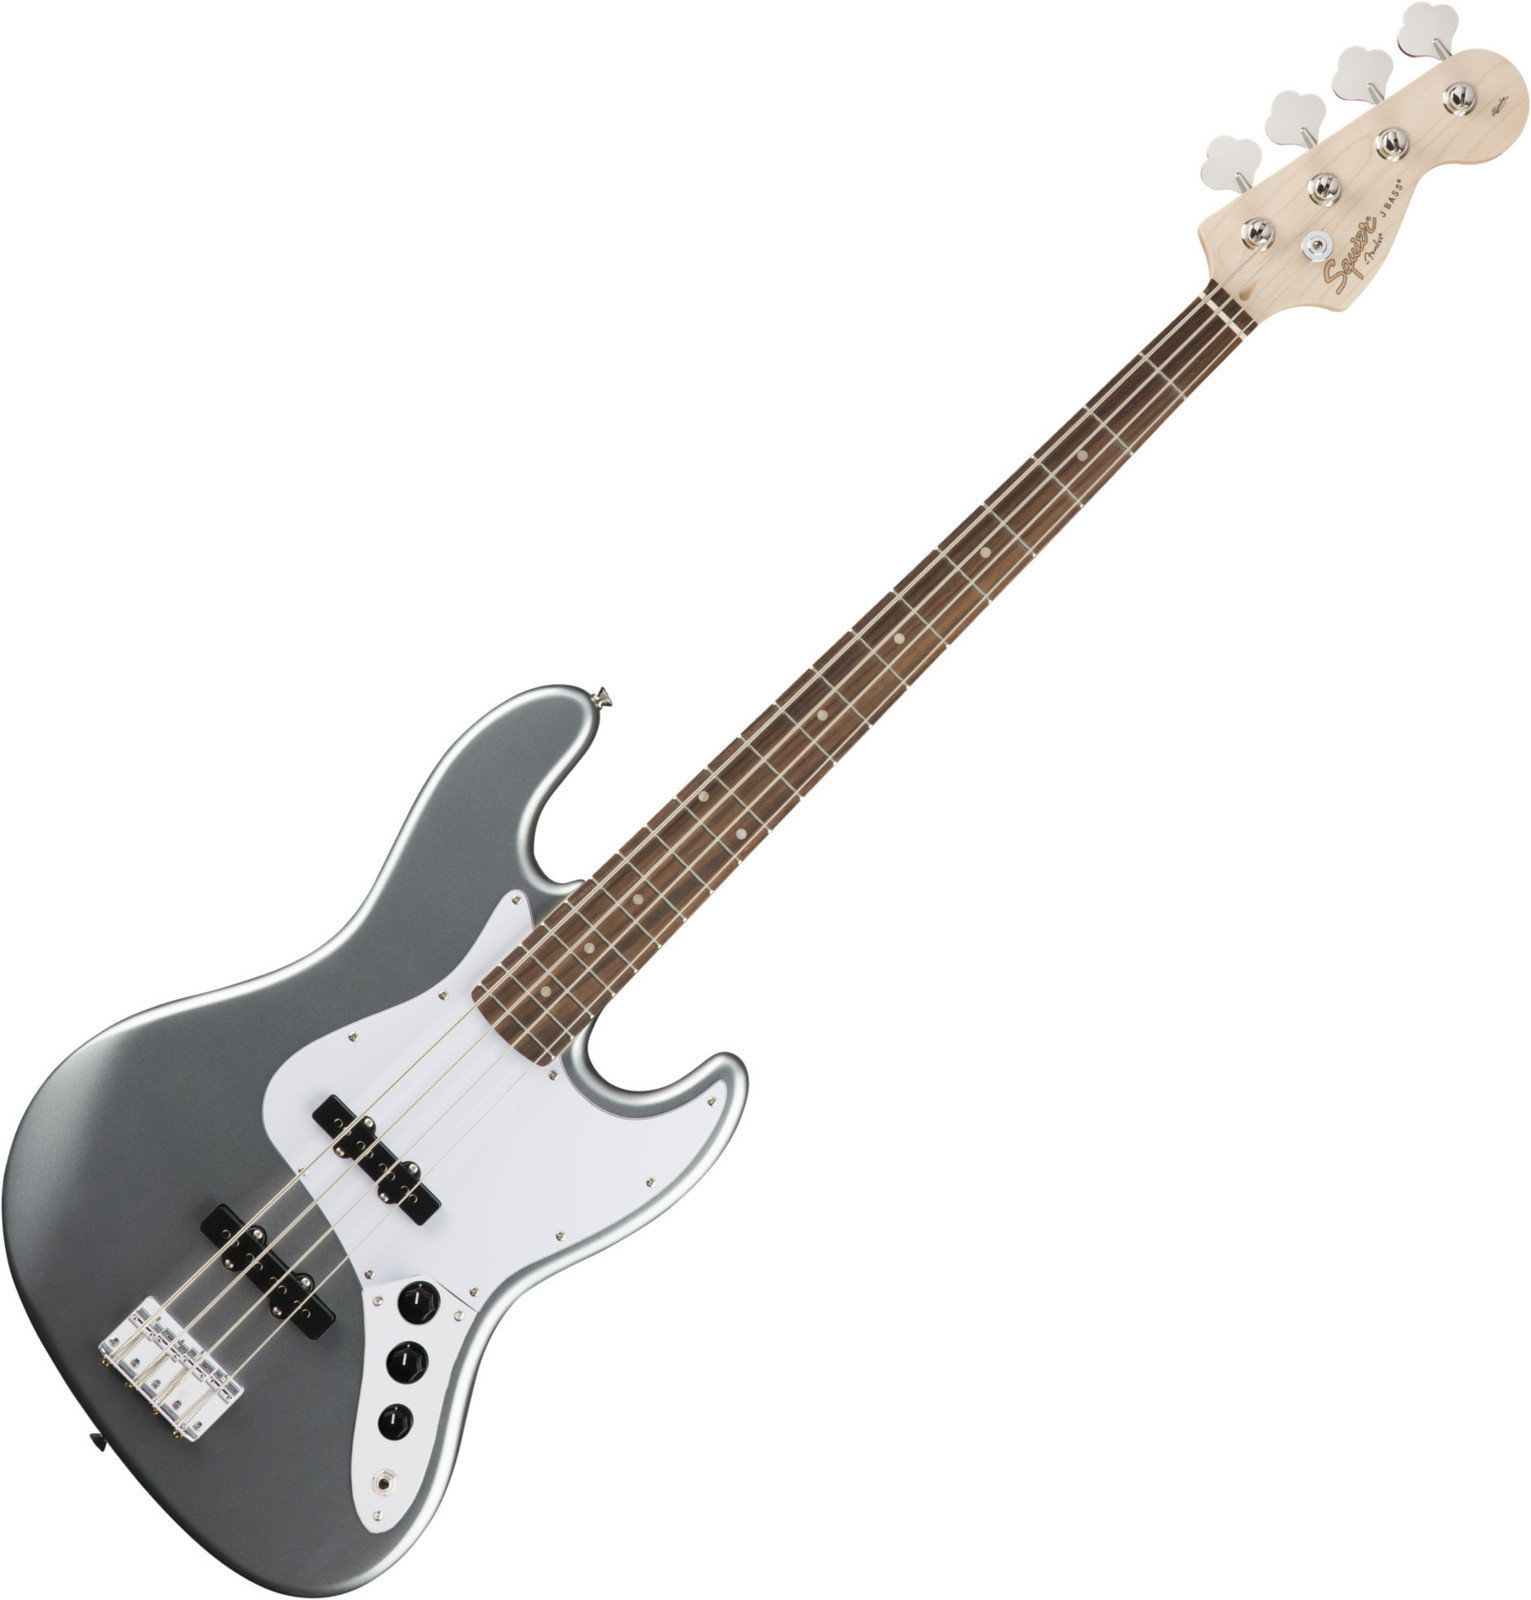 E-Bass Fender Squier Affinity Series Jazz Bass IL Slick Silver